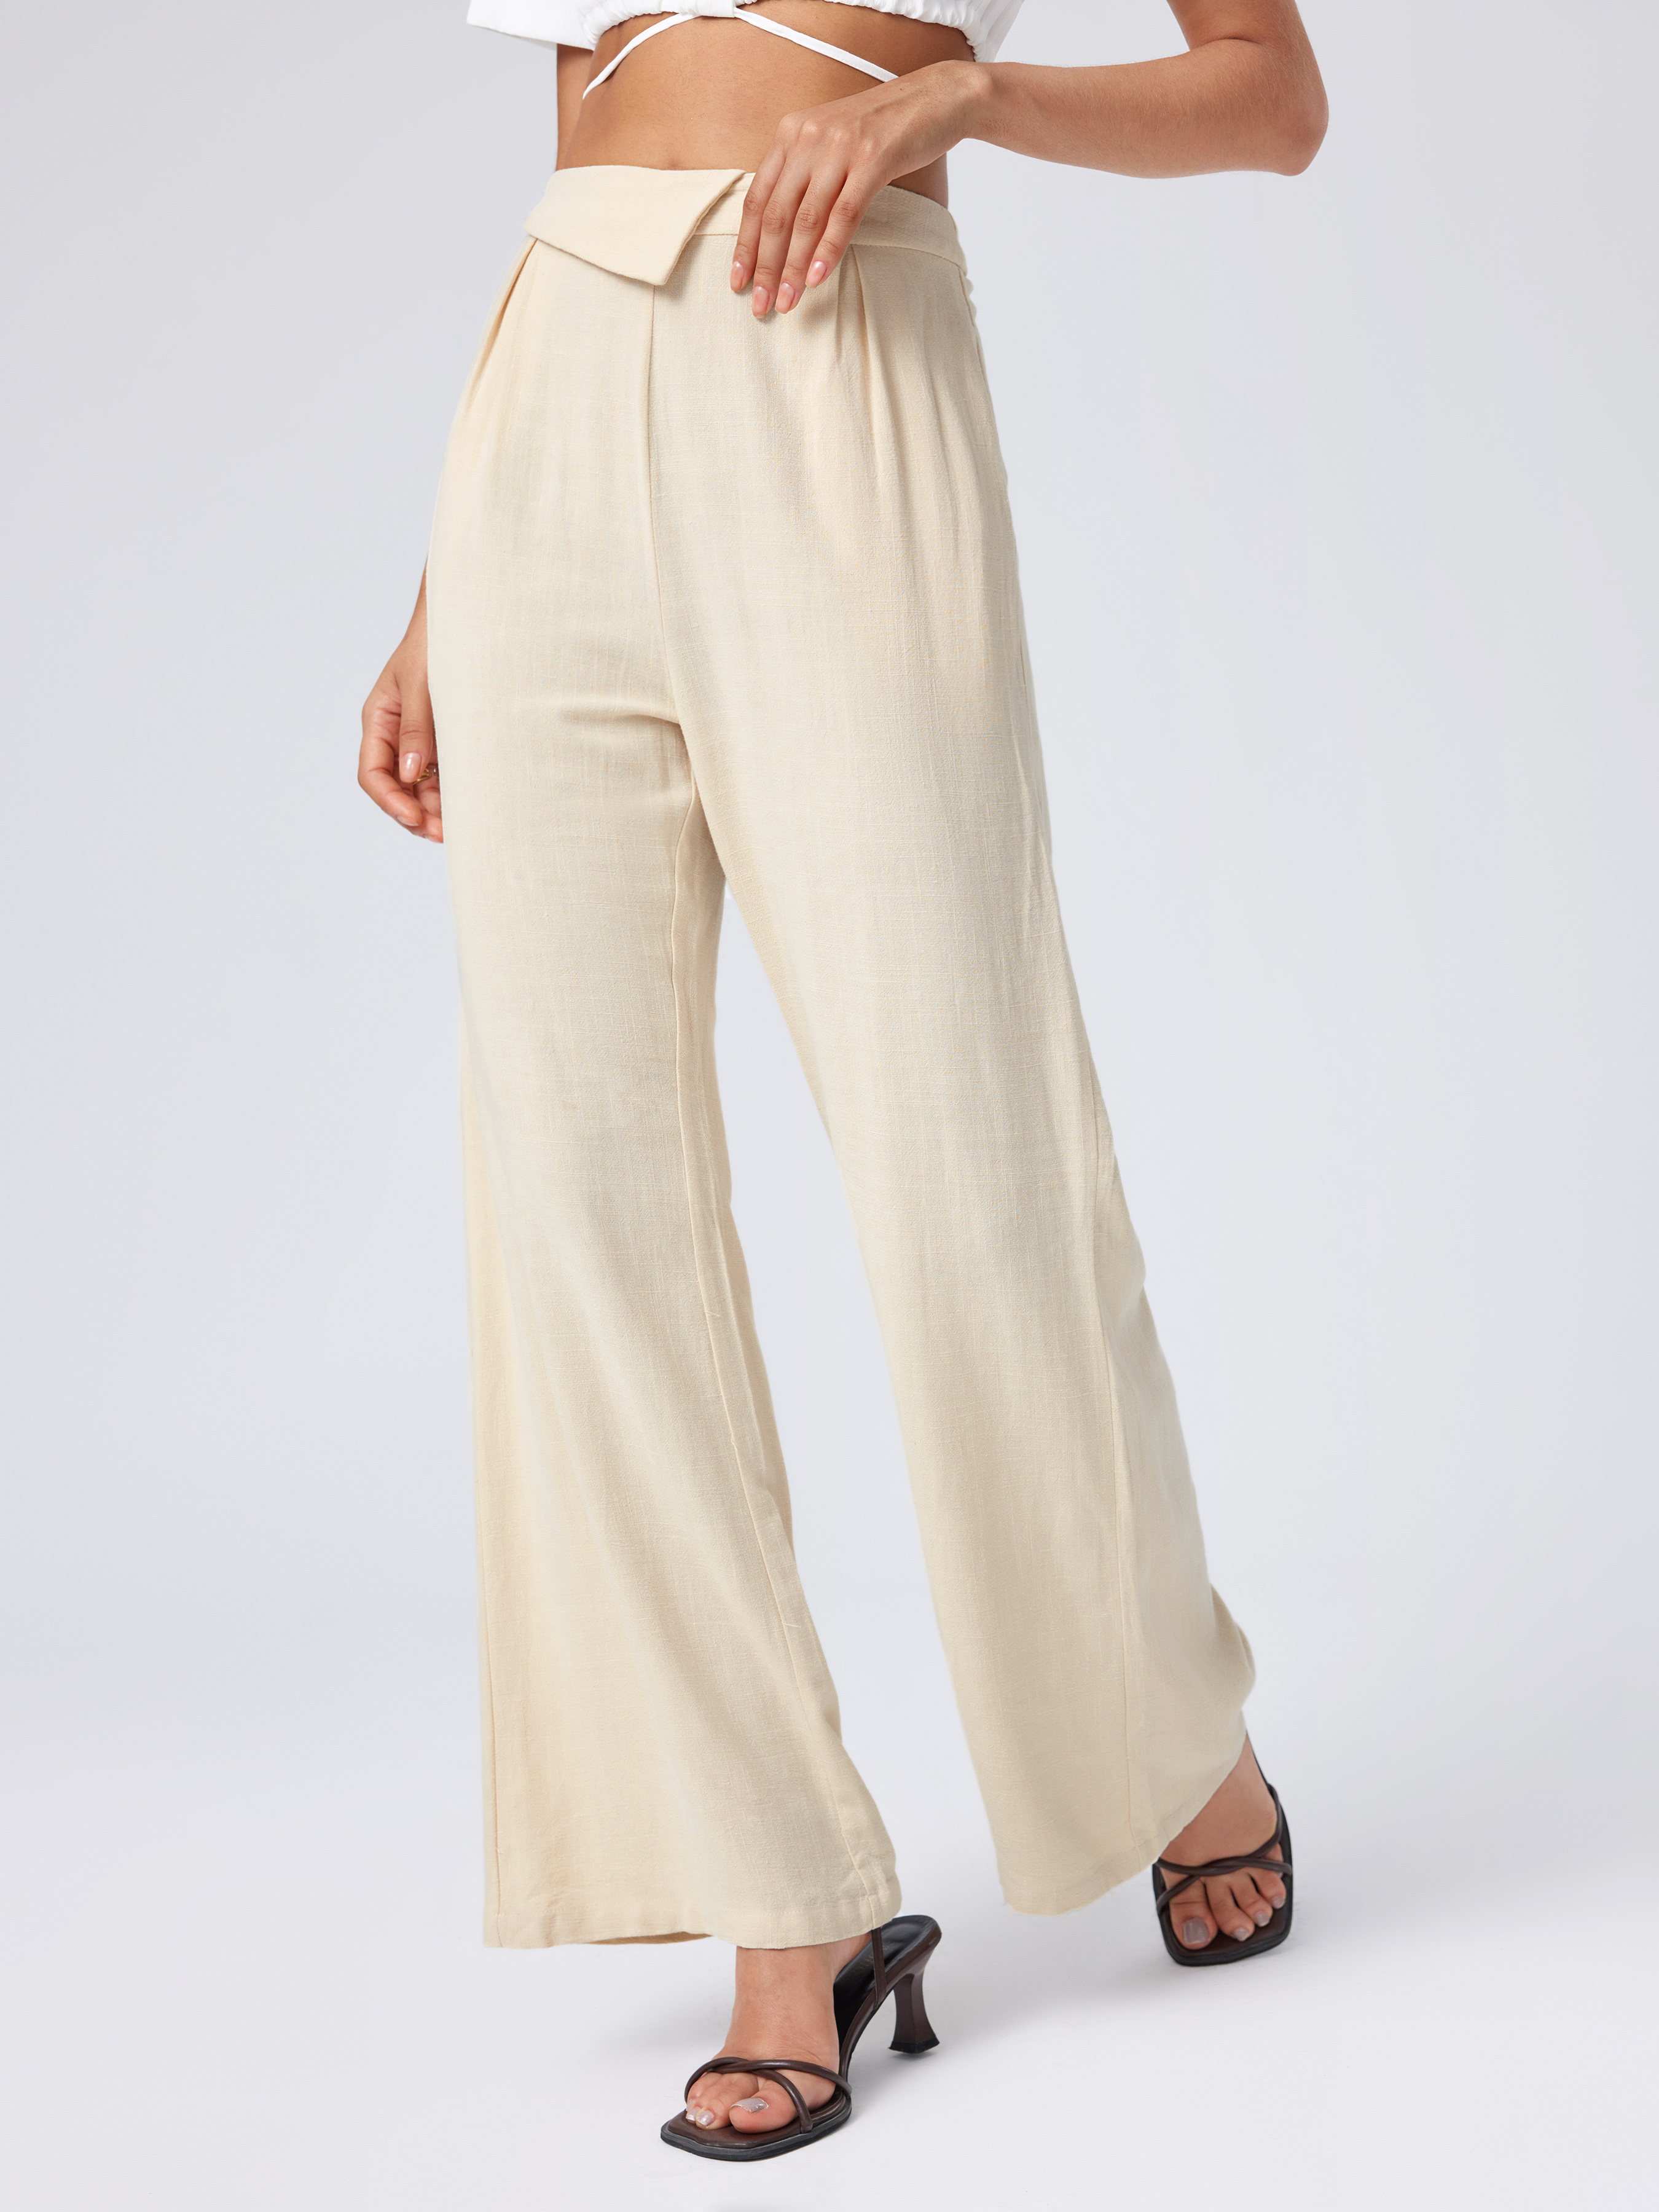 Buy Off-White Trousers & Pants for Women by Jaipurethnicweaves Online |  Ajio.com